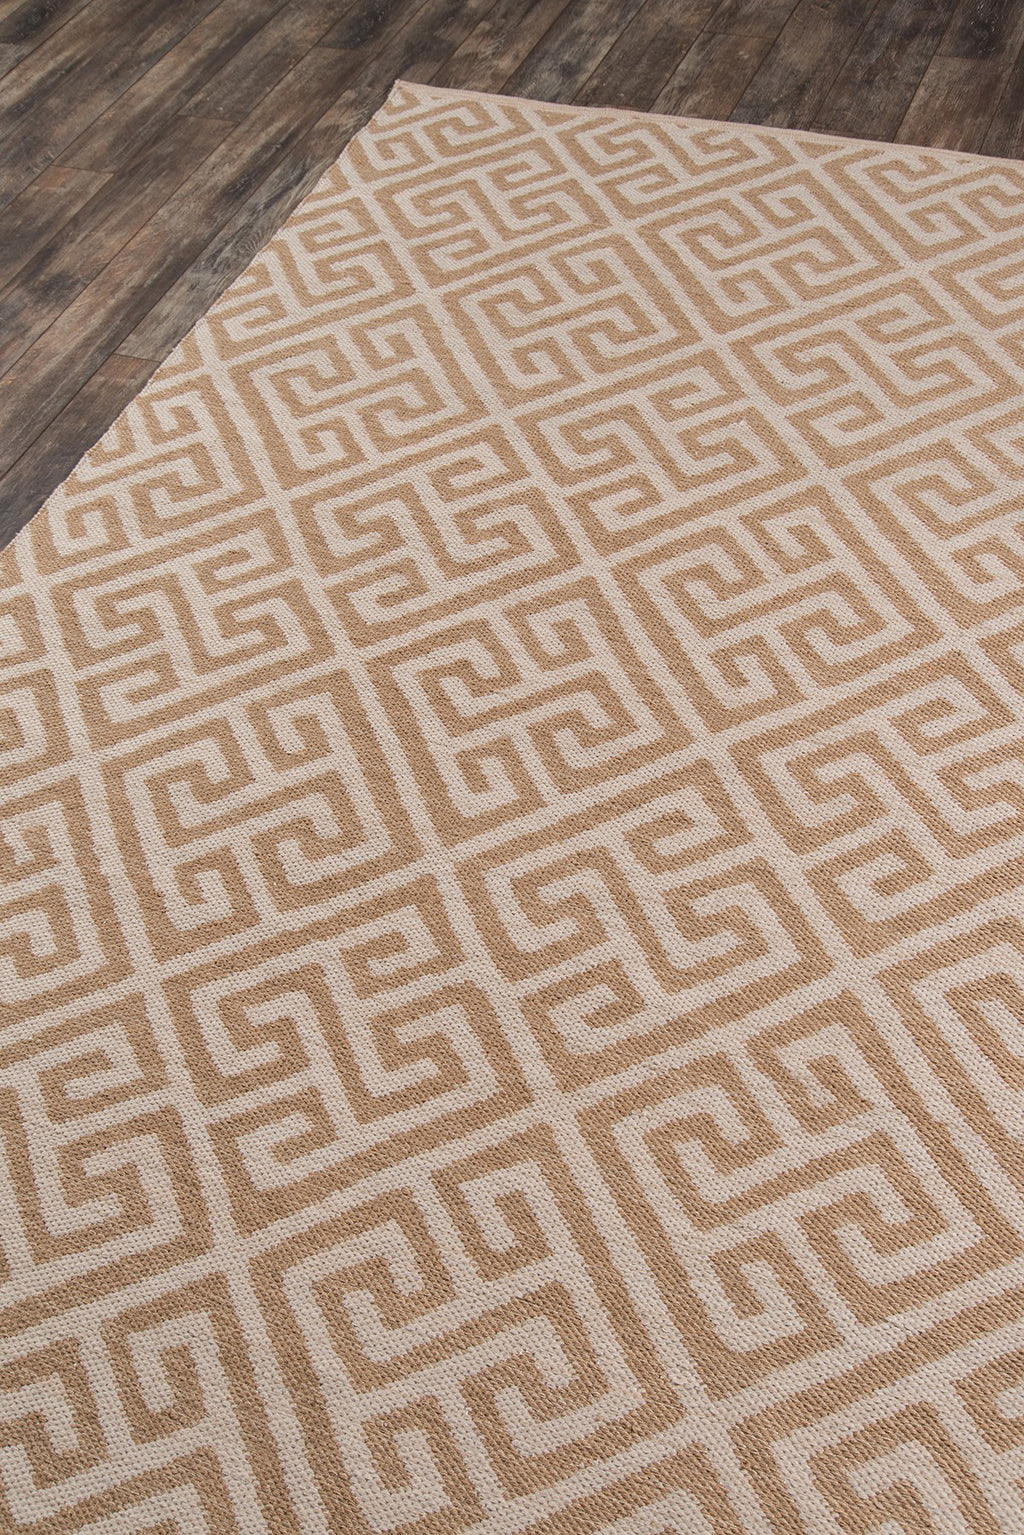 Momeni Palm Beach PAM-4 Brown Area Rug by MADCAP Corner Image Feature